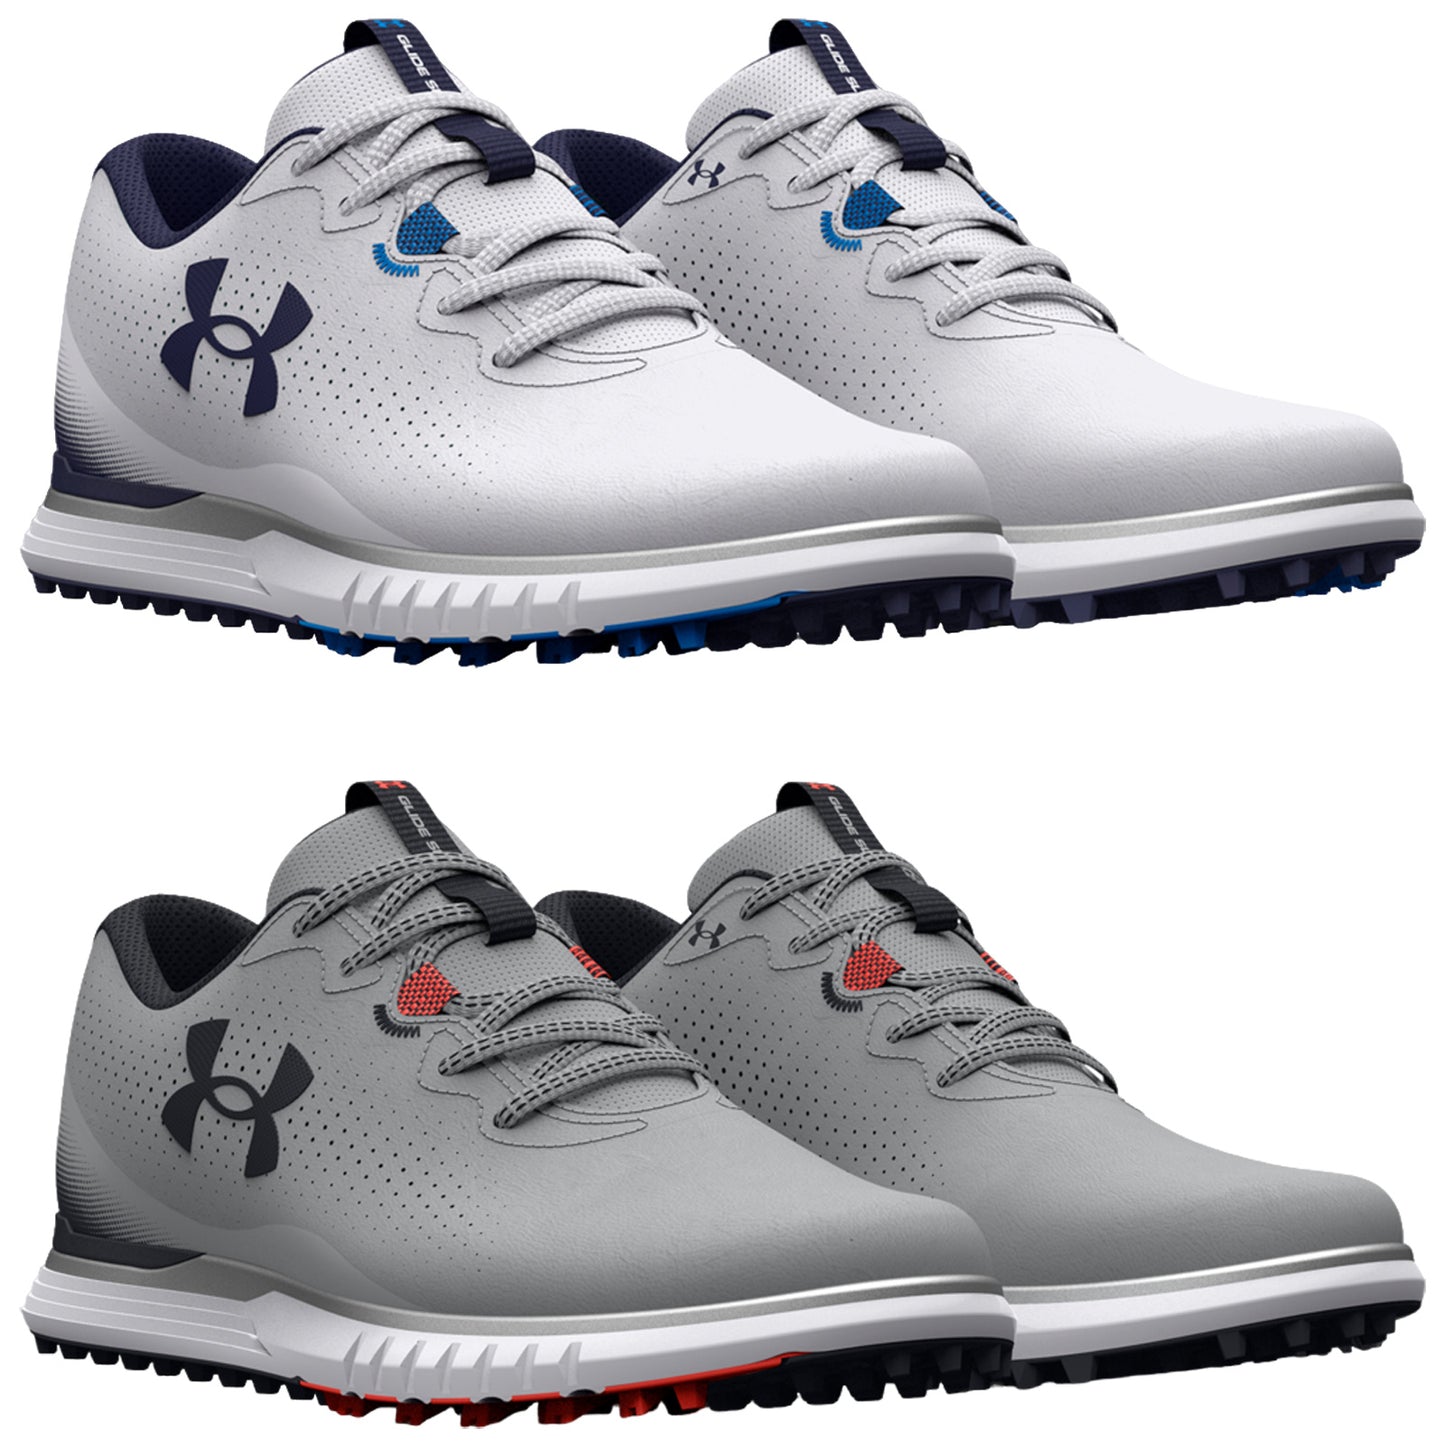 Under Armour Mens Glide 2 SL Golf Shoes 3026402